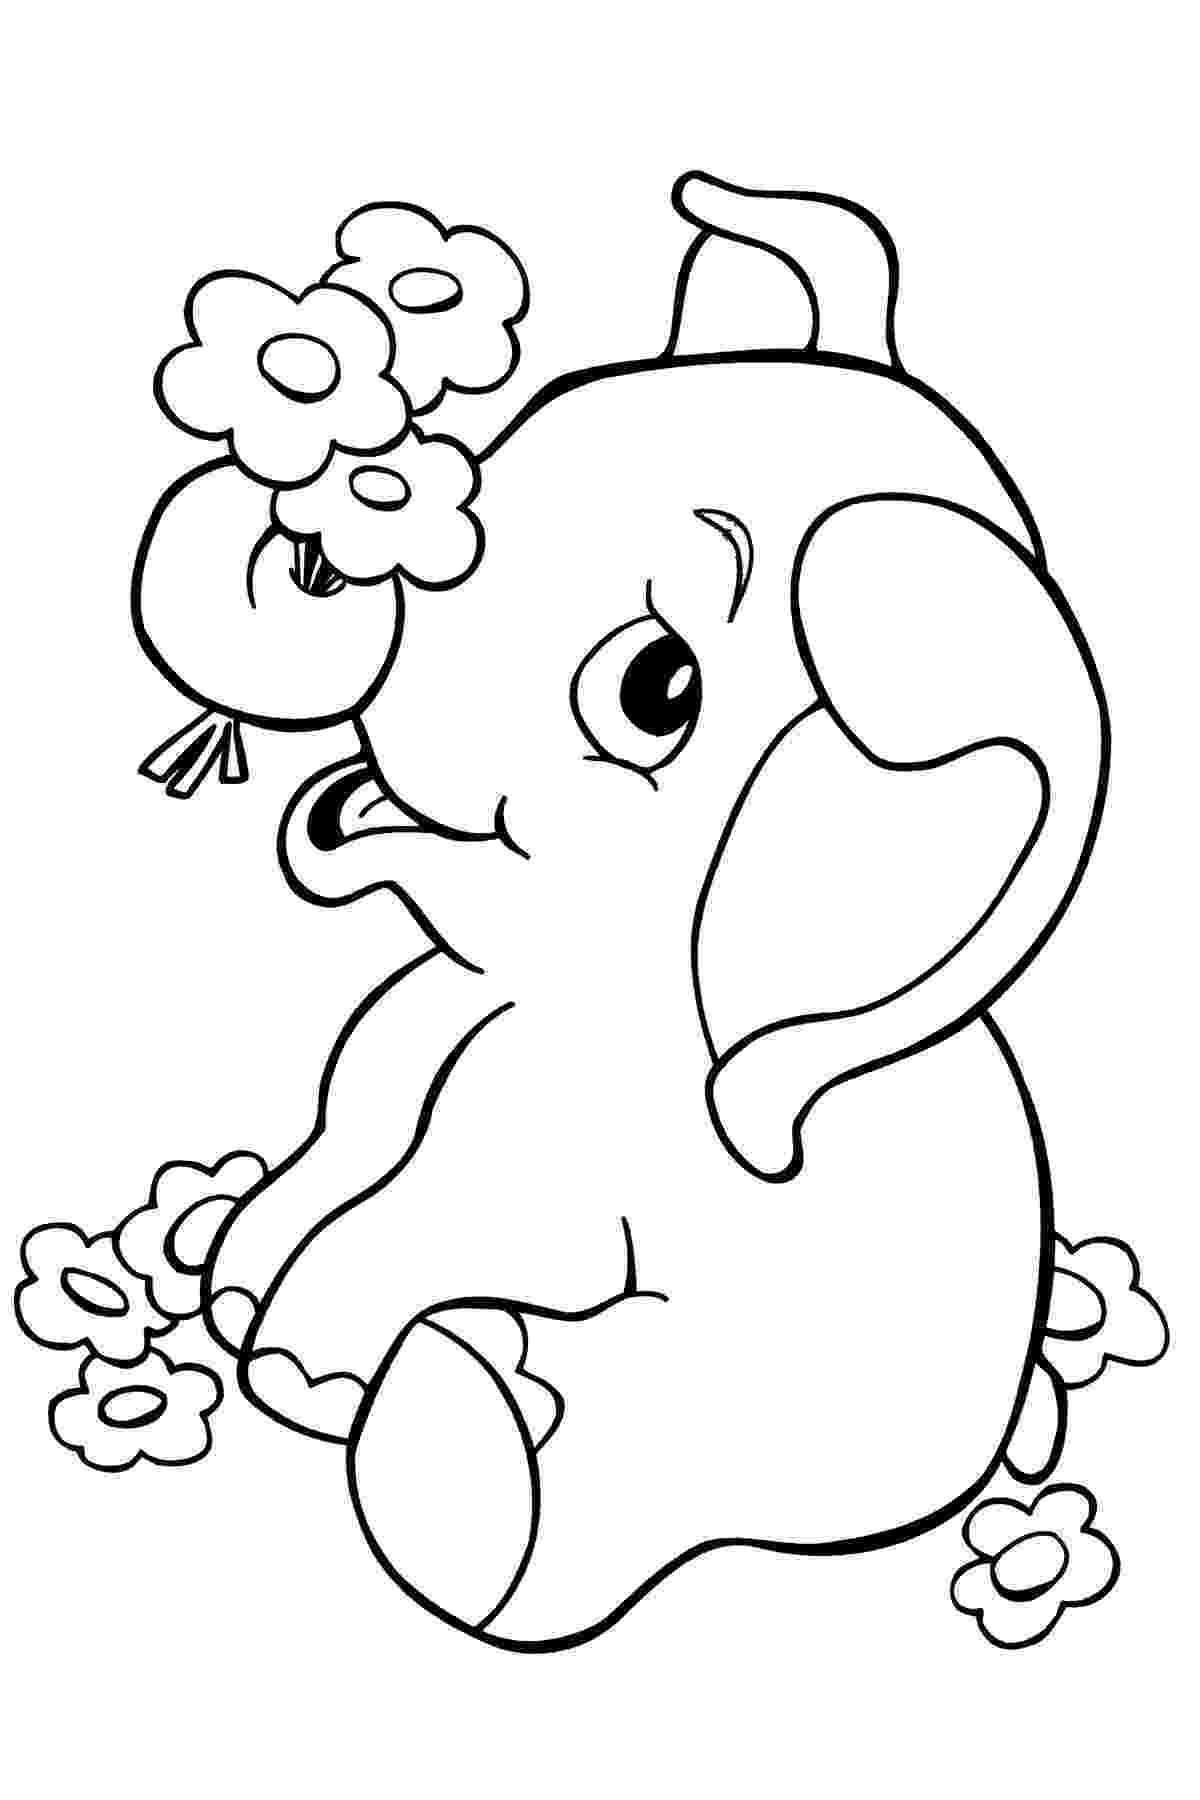 printable elephant pictures cute baby elephant coloring pages part 3 elephant pictures printable 